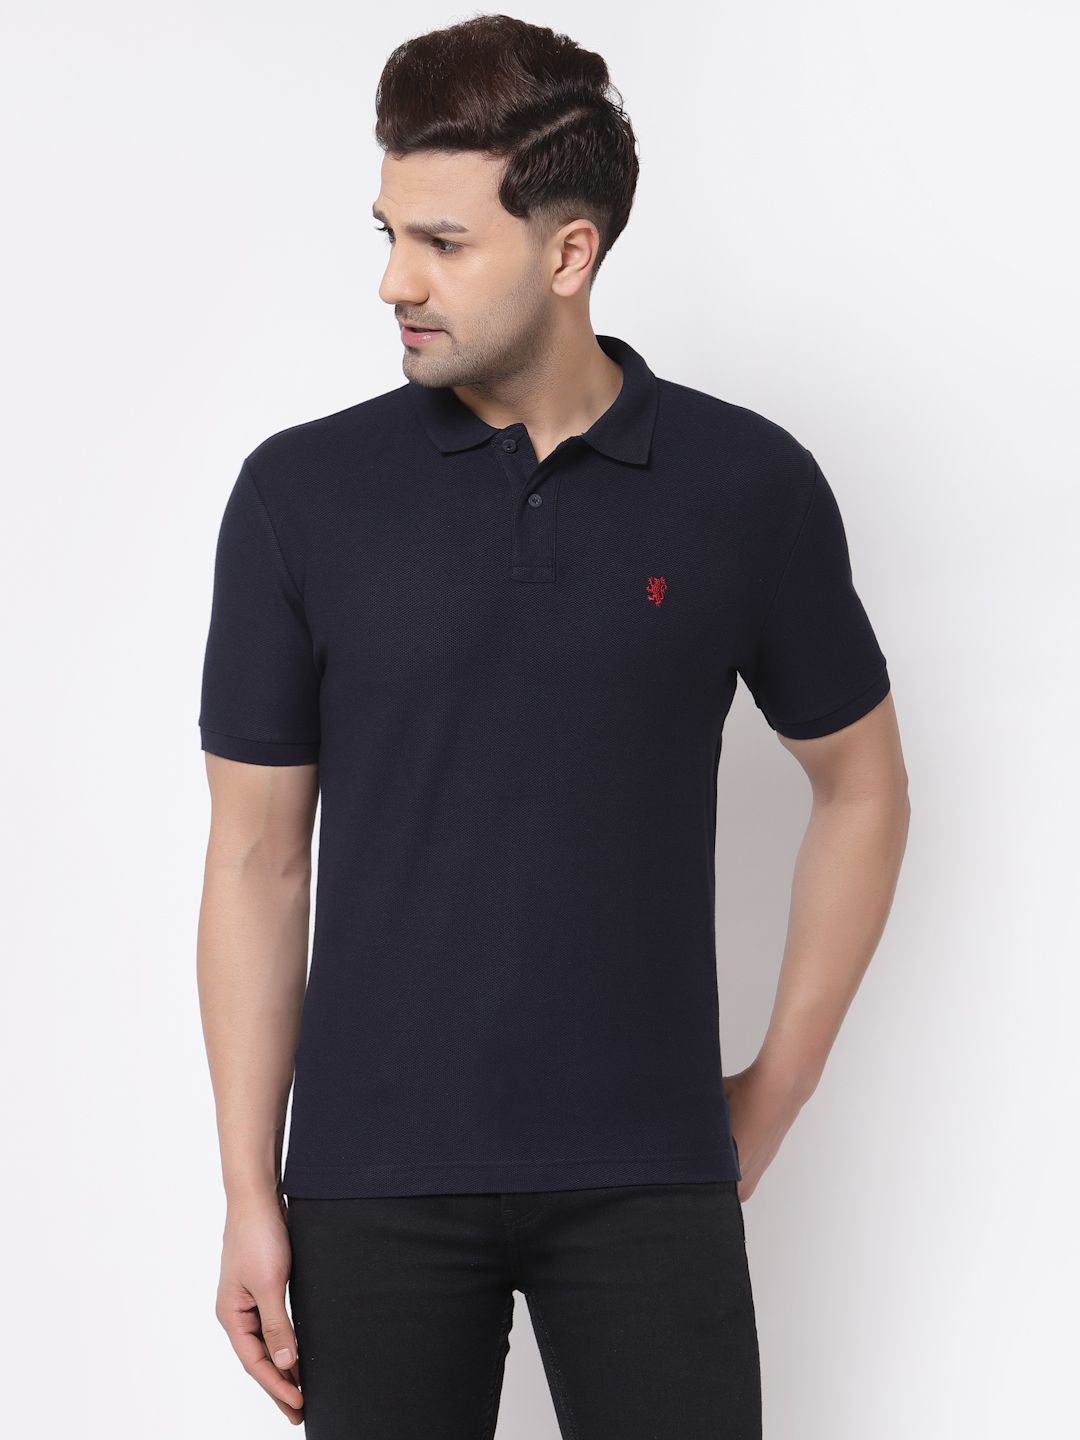     			Red Tape Cotton Regular Fit Solid Half Sleeves Men's Polo T Shirt - Navy ( Pack of 1 )